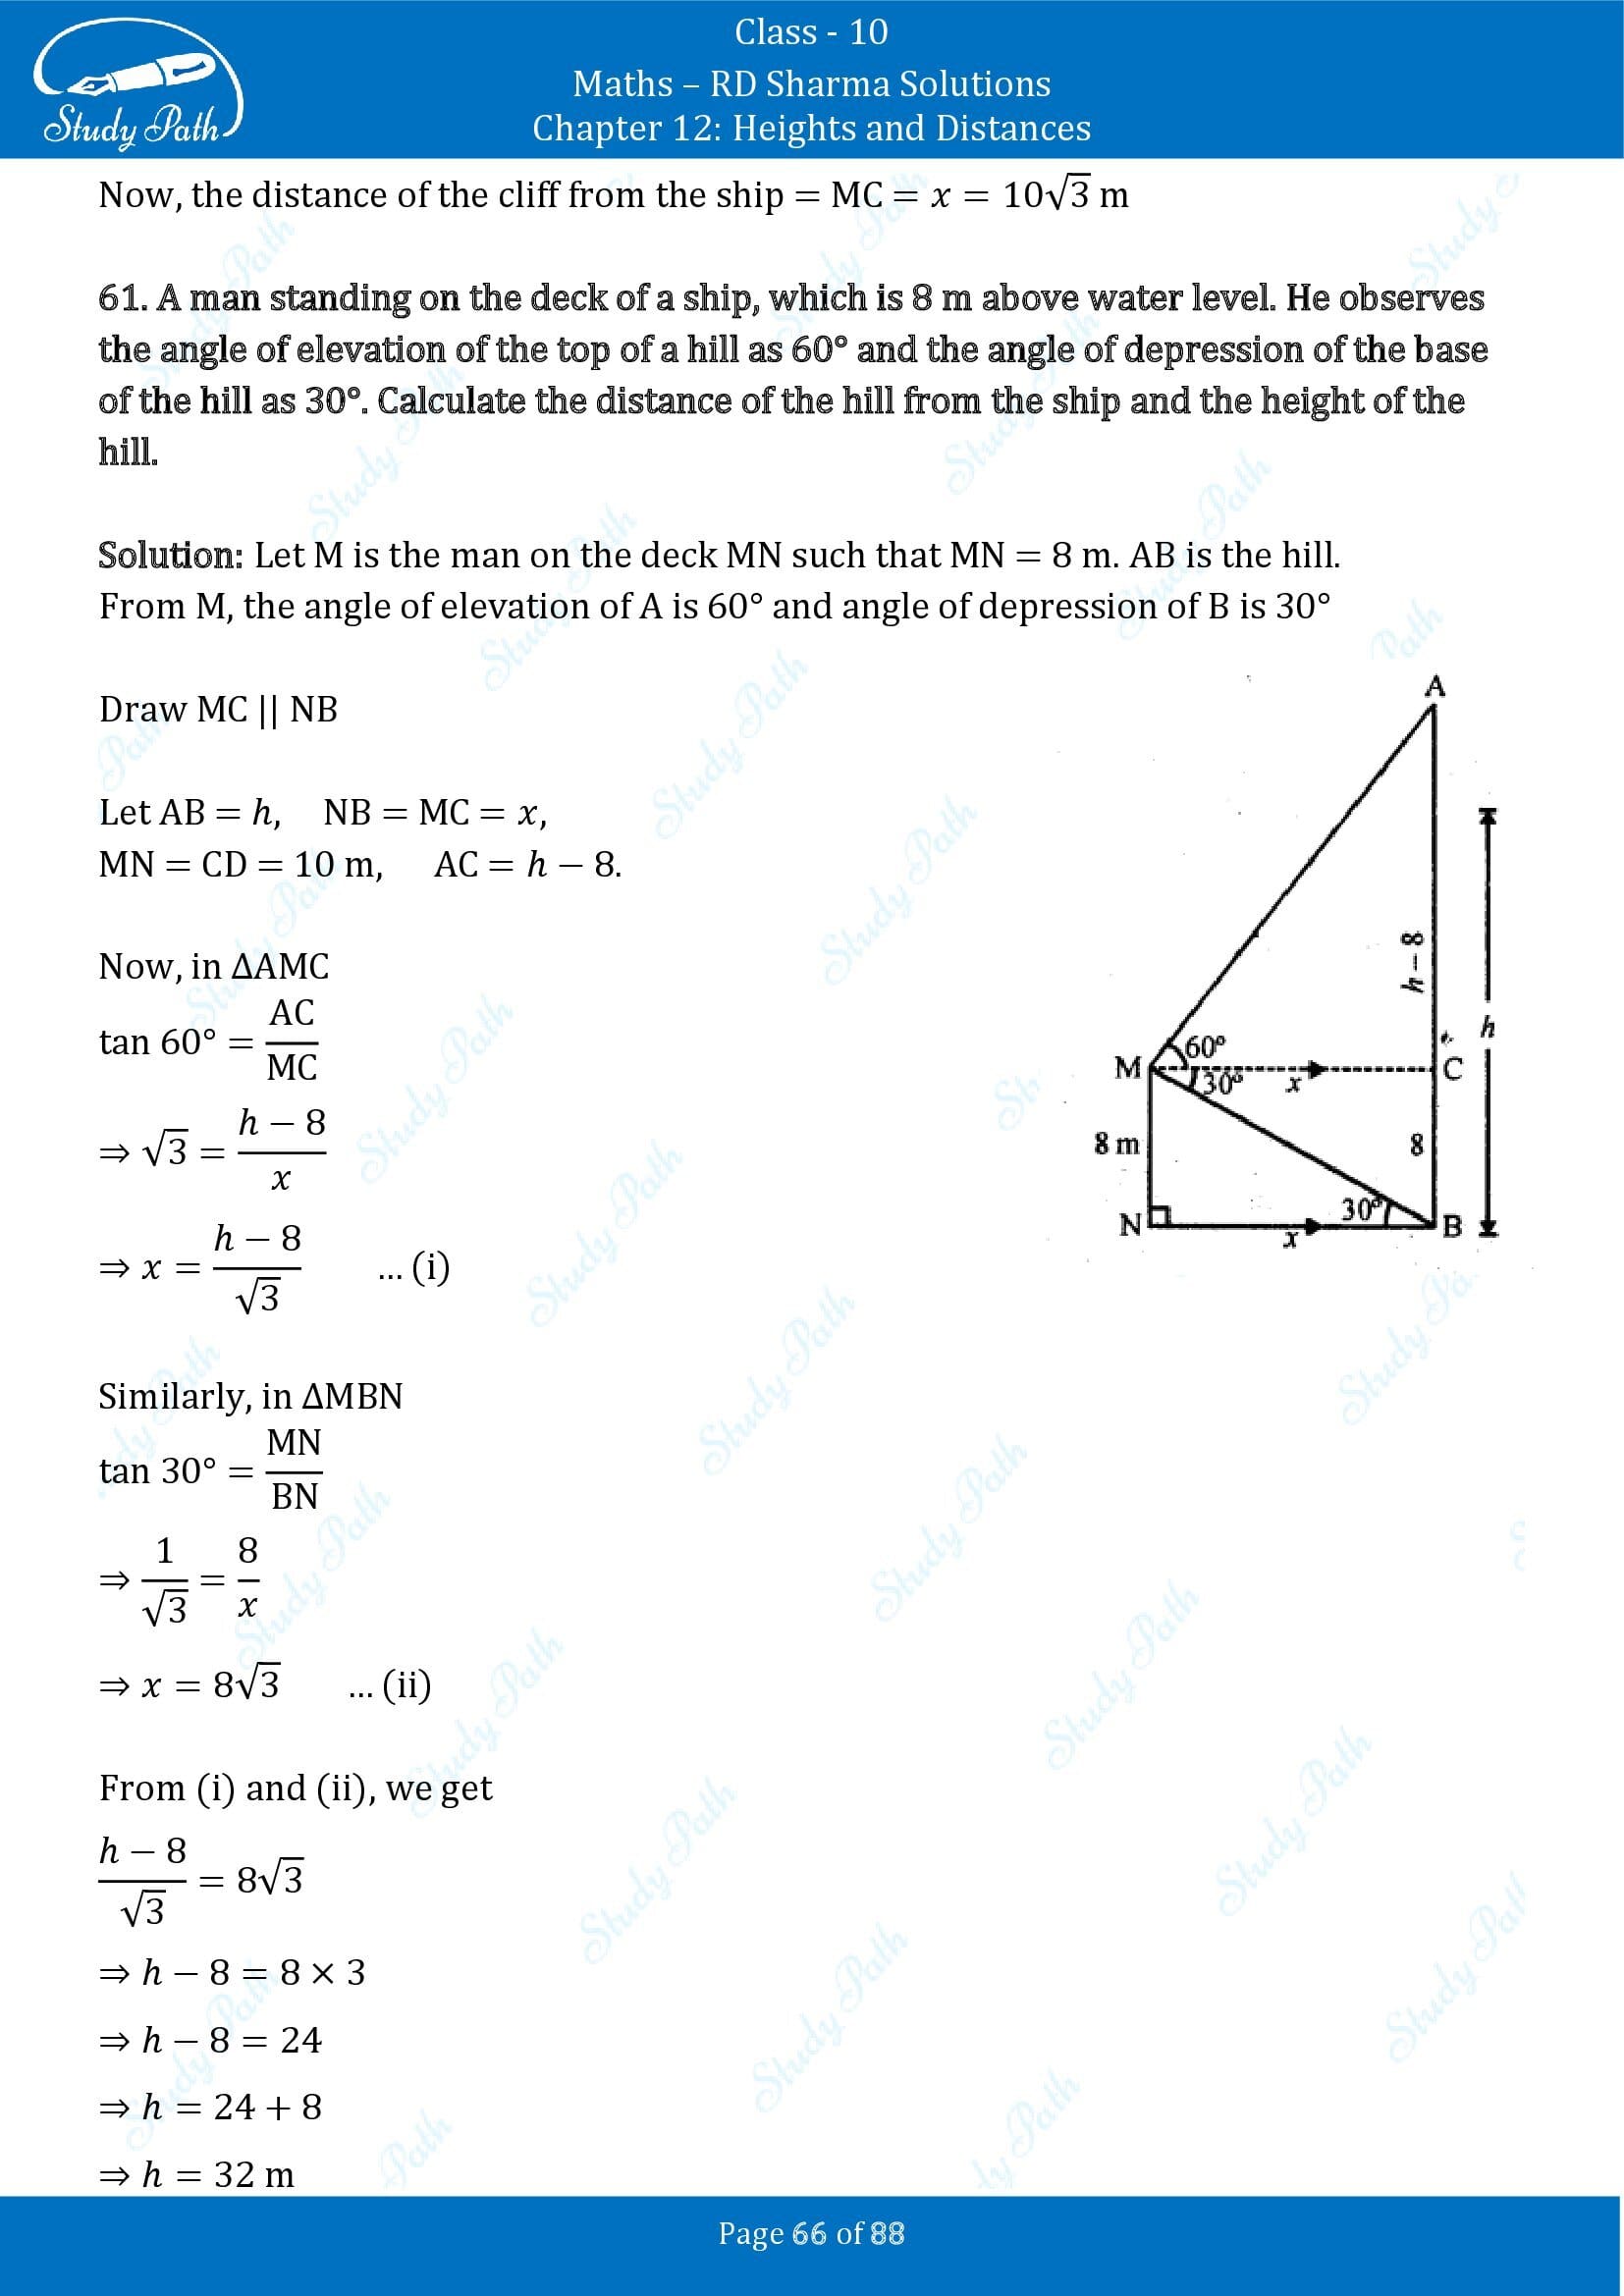 RD Sharma Solutions Class 10 Chapter 12 Heights and Distances Exercise 12.1 00066